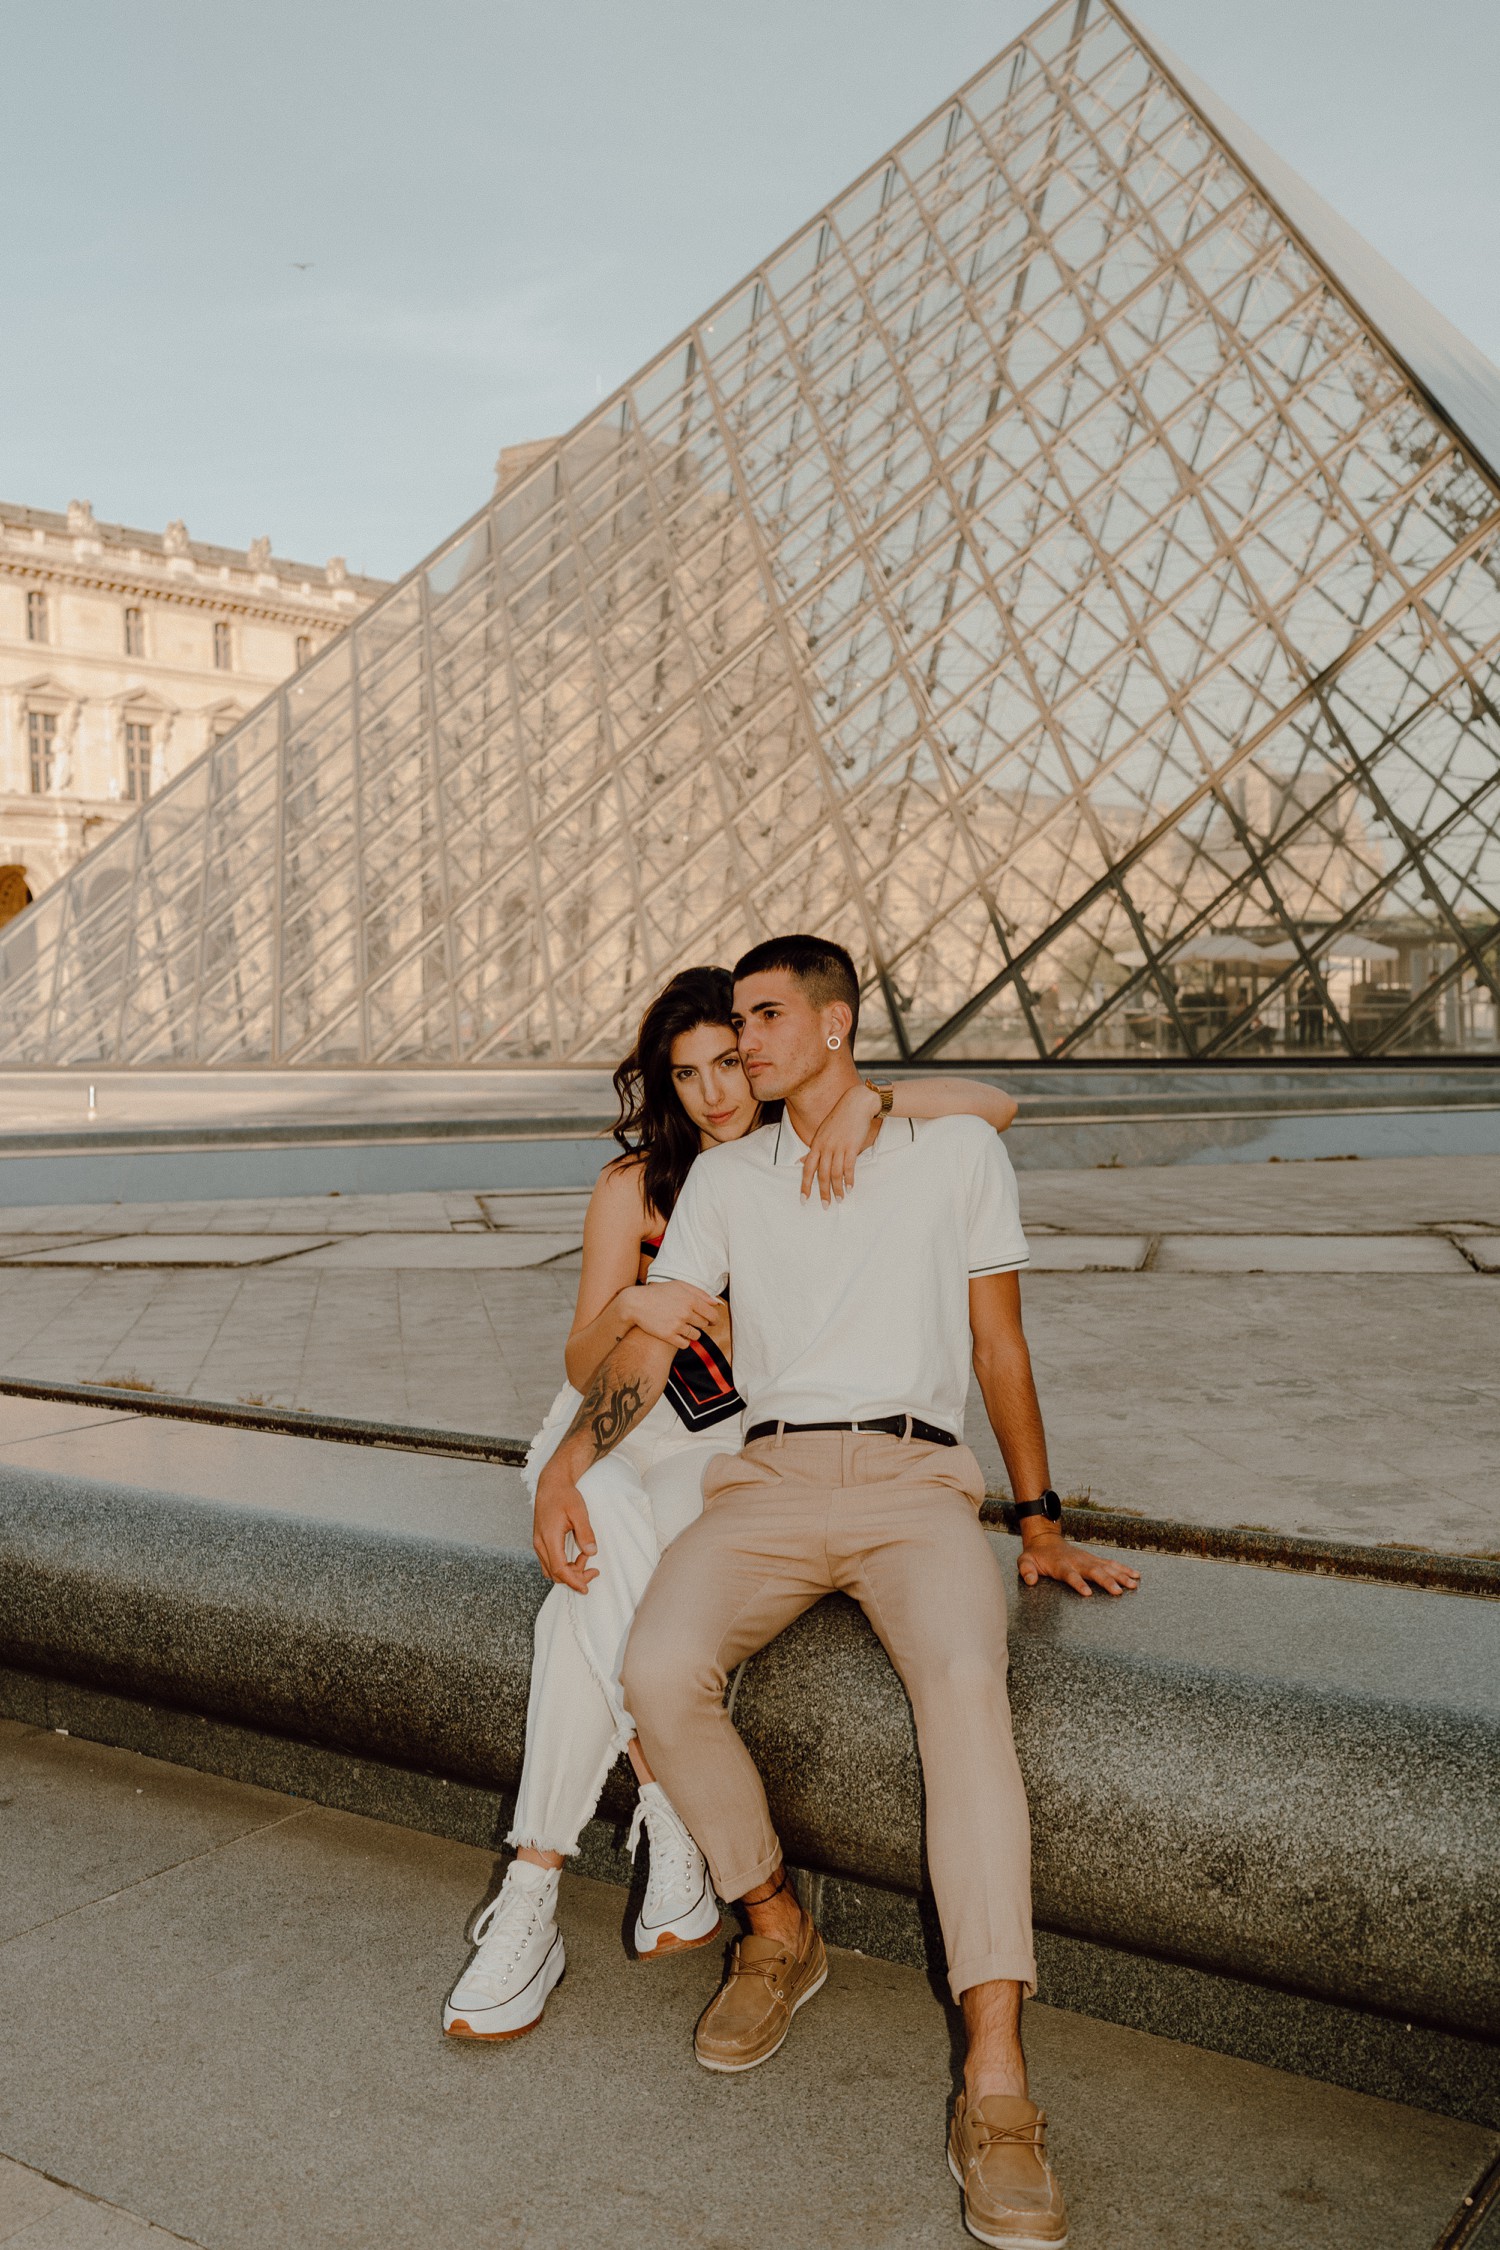 Louvre Pyramid Couples Photo Session